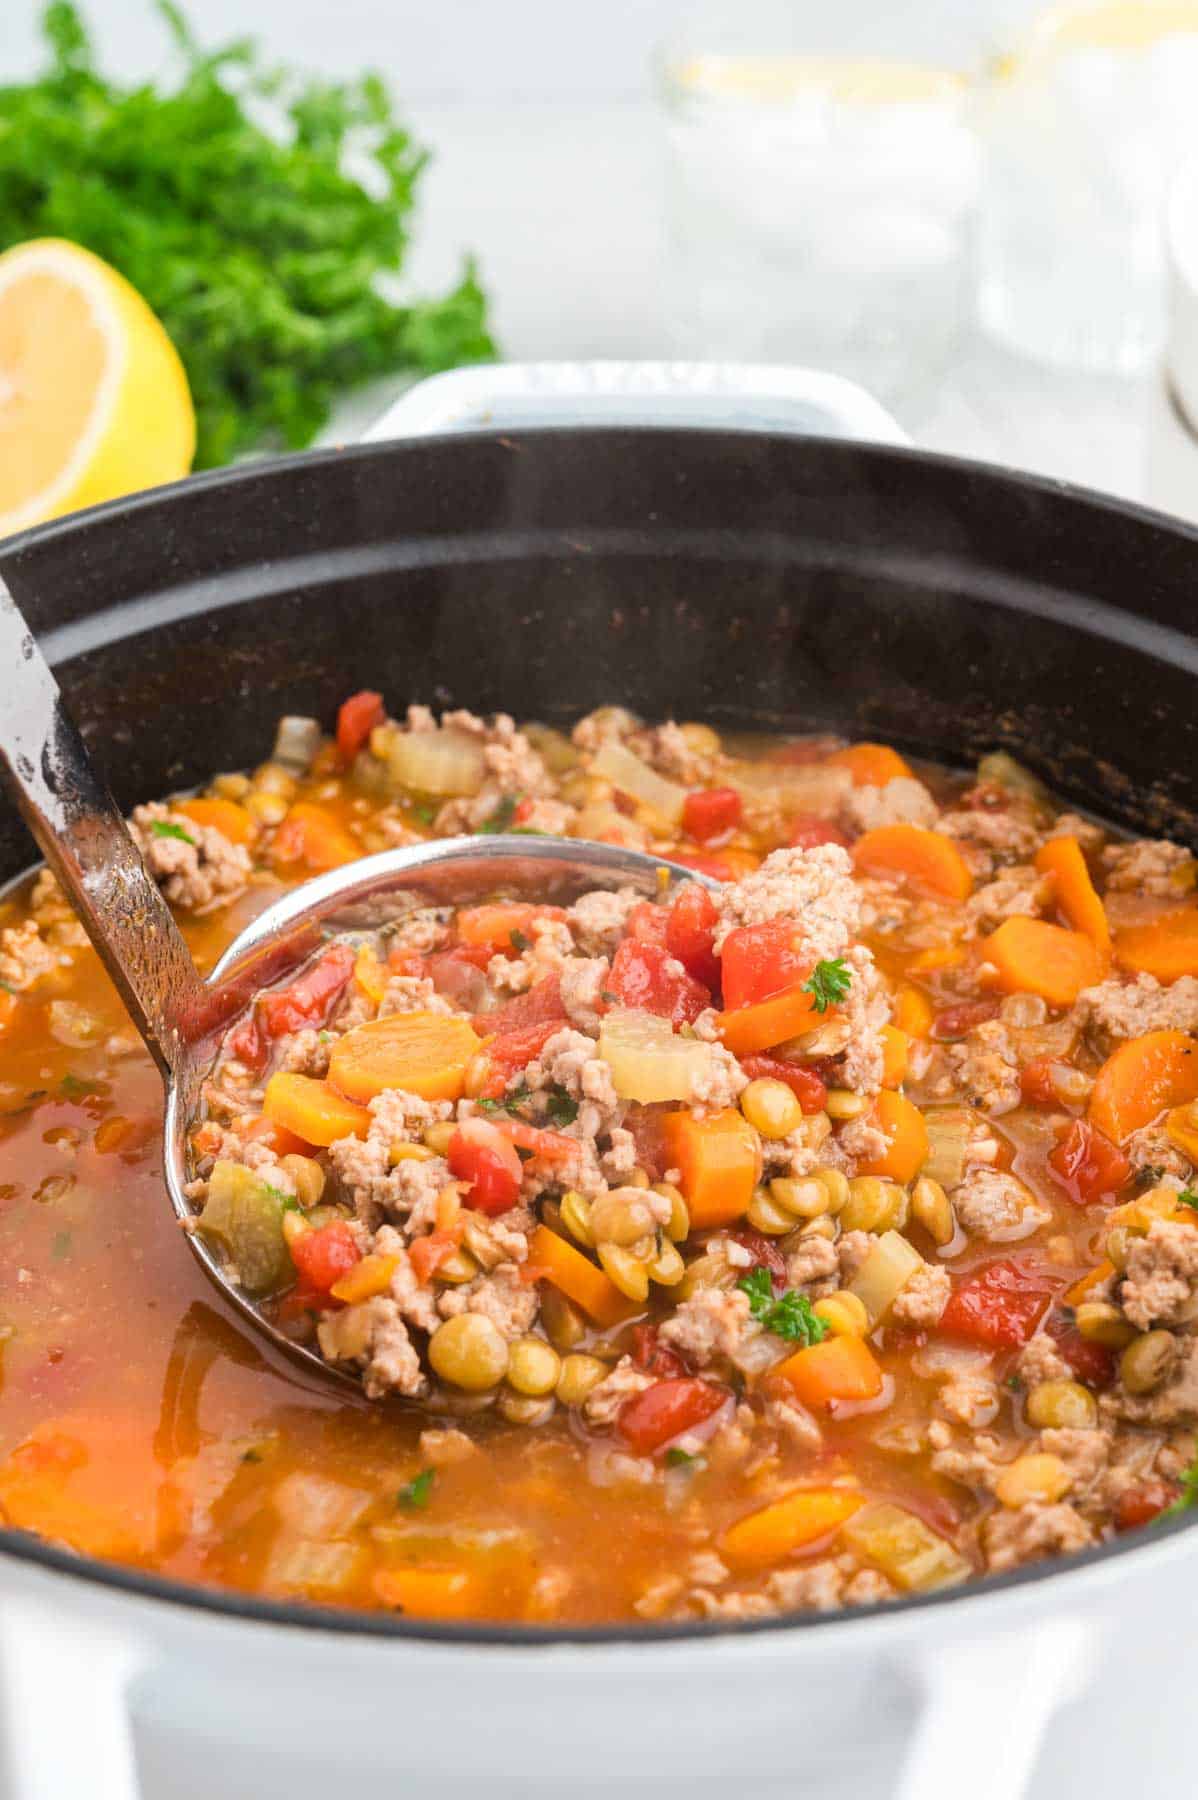 Turkey Lentil Soup is a hearty soup loaded with ground turkey, brown lentils, celery, carrots, onion and diced tomatoes.